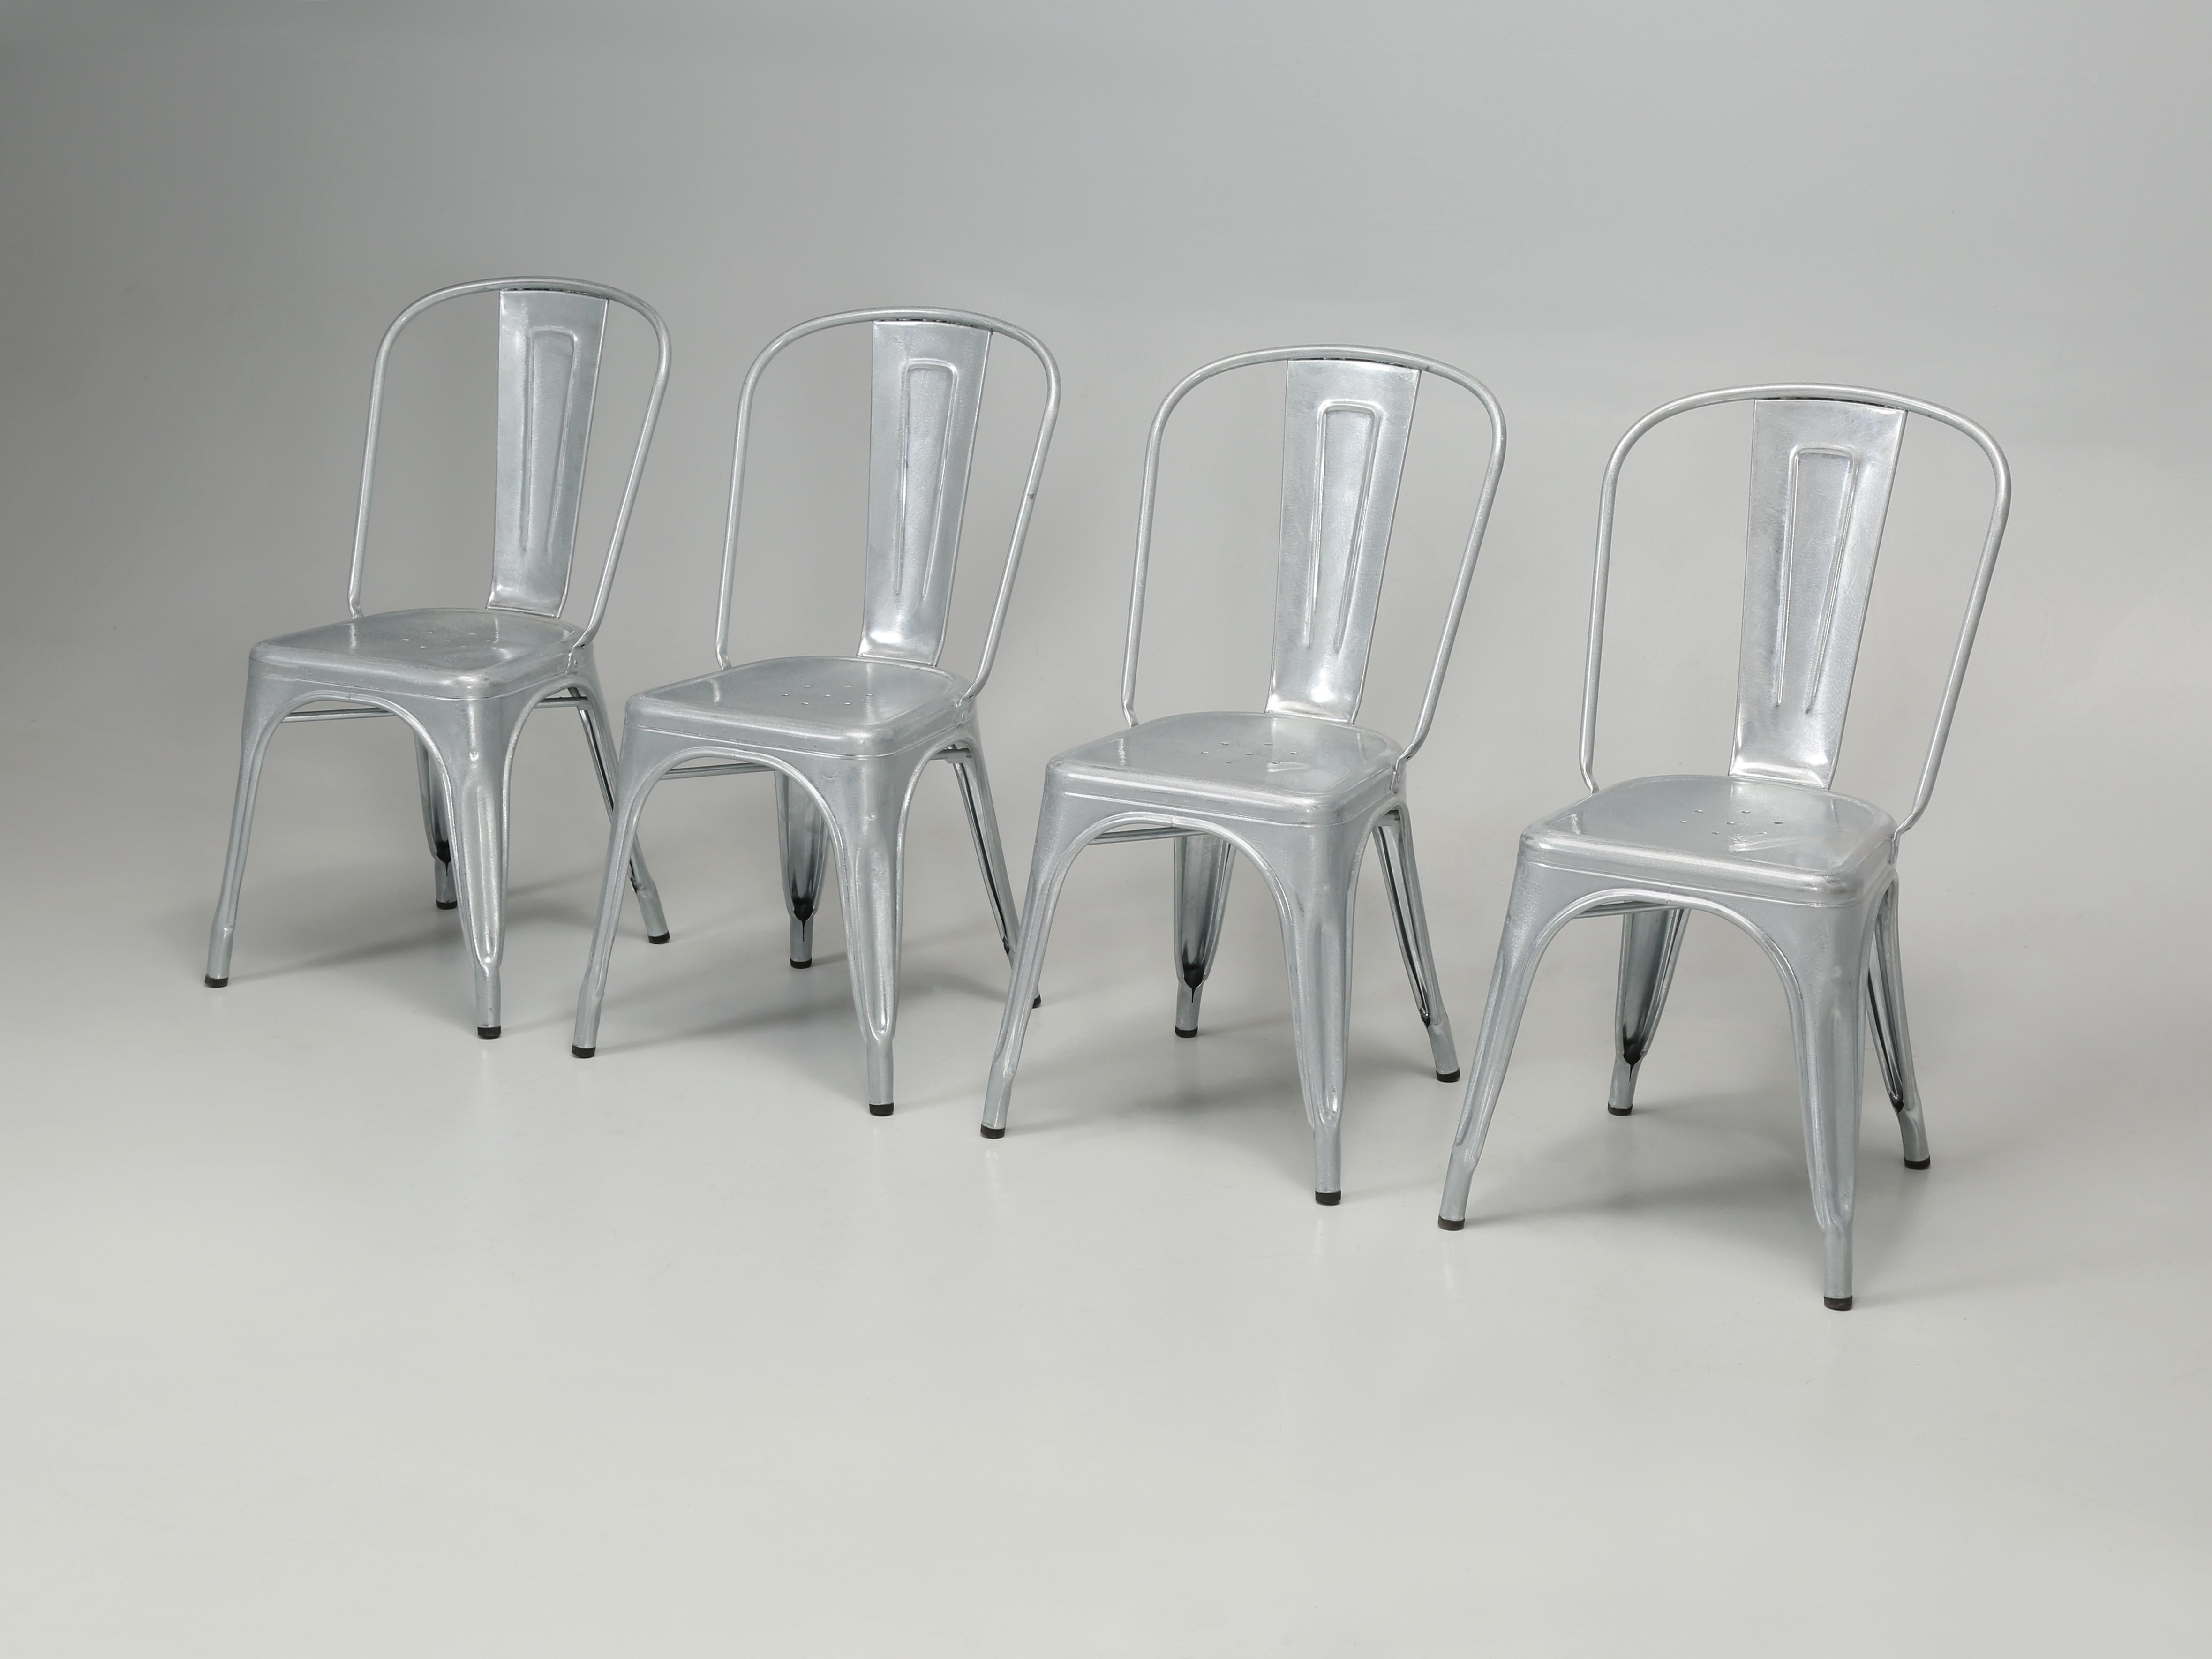 Genuine French Made Tolix steel stacking chairs with an unusual “Galvanized Finish” Strangely enough, it was France where the first Galvanized process was patented in 1836. By Galvanizing the Tolix Chairs, they become true Outdoor Dining Chairs and